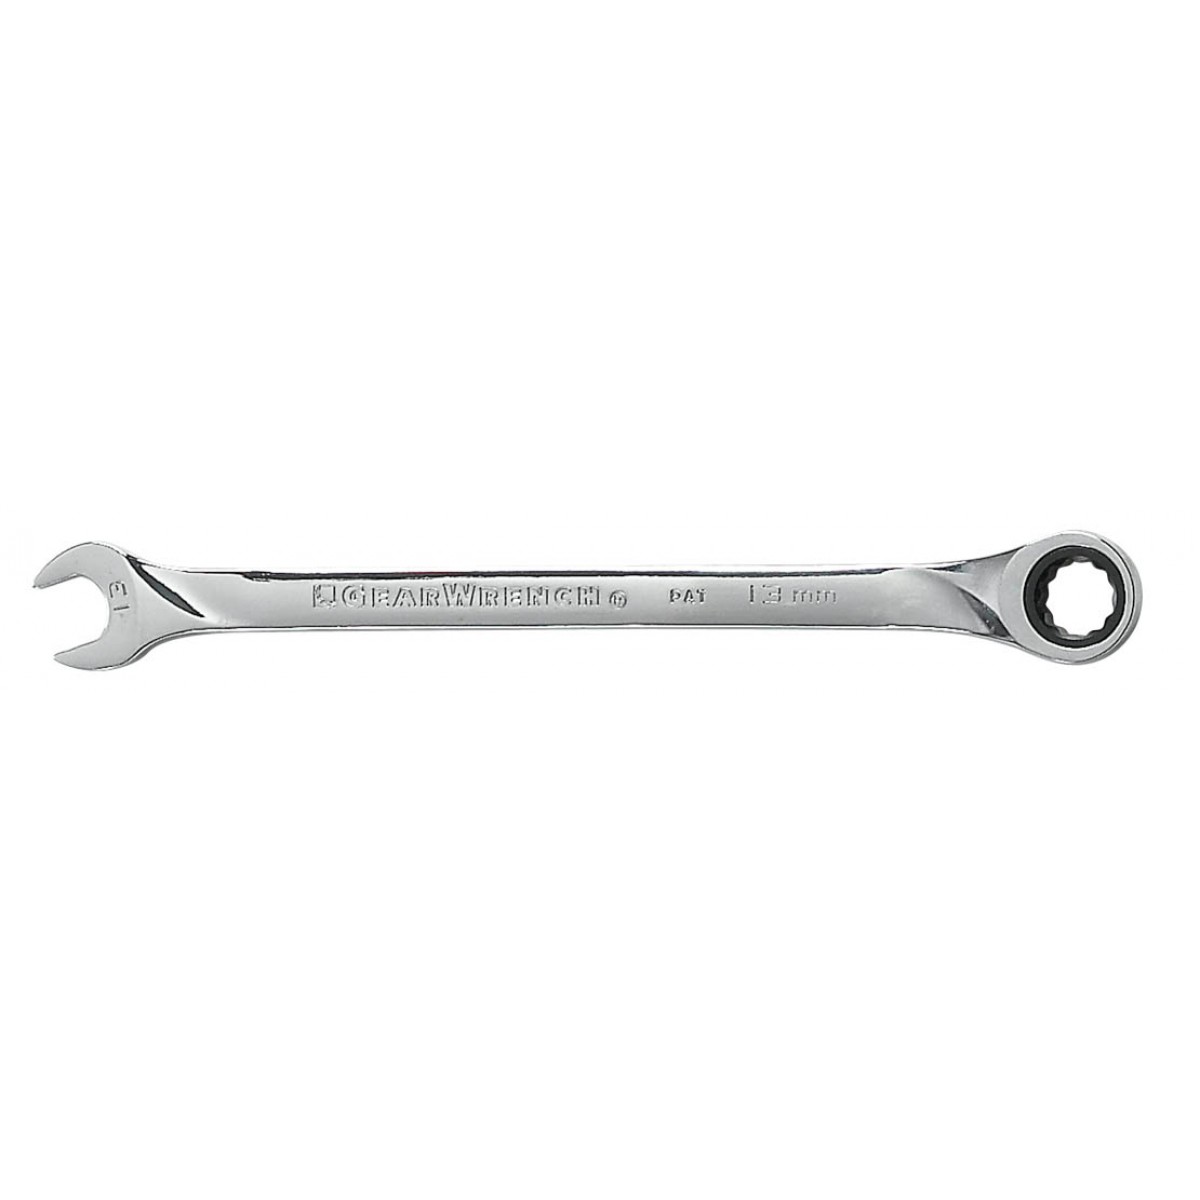 Apex Tool Group- Kd,kd Gear, Cooper Hand Gwr85132 1 In. X L Ratcheting Combination Wrench